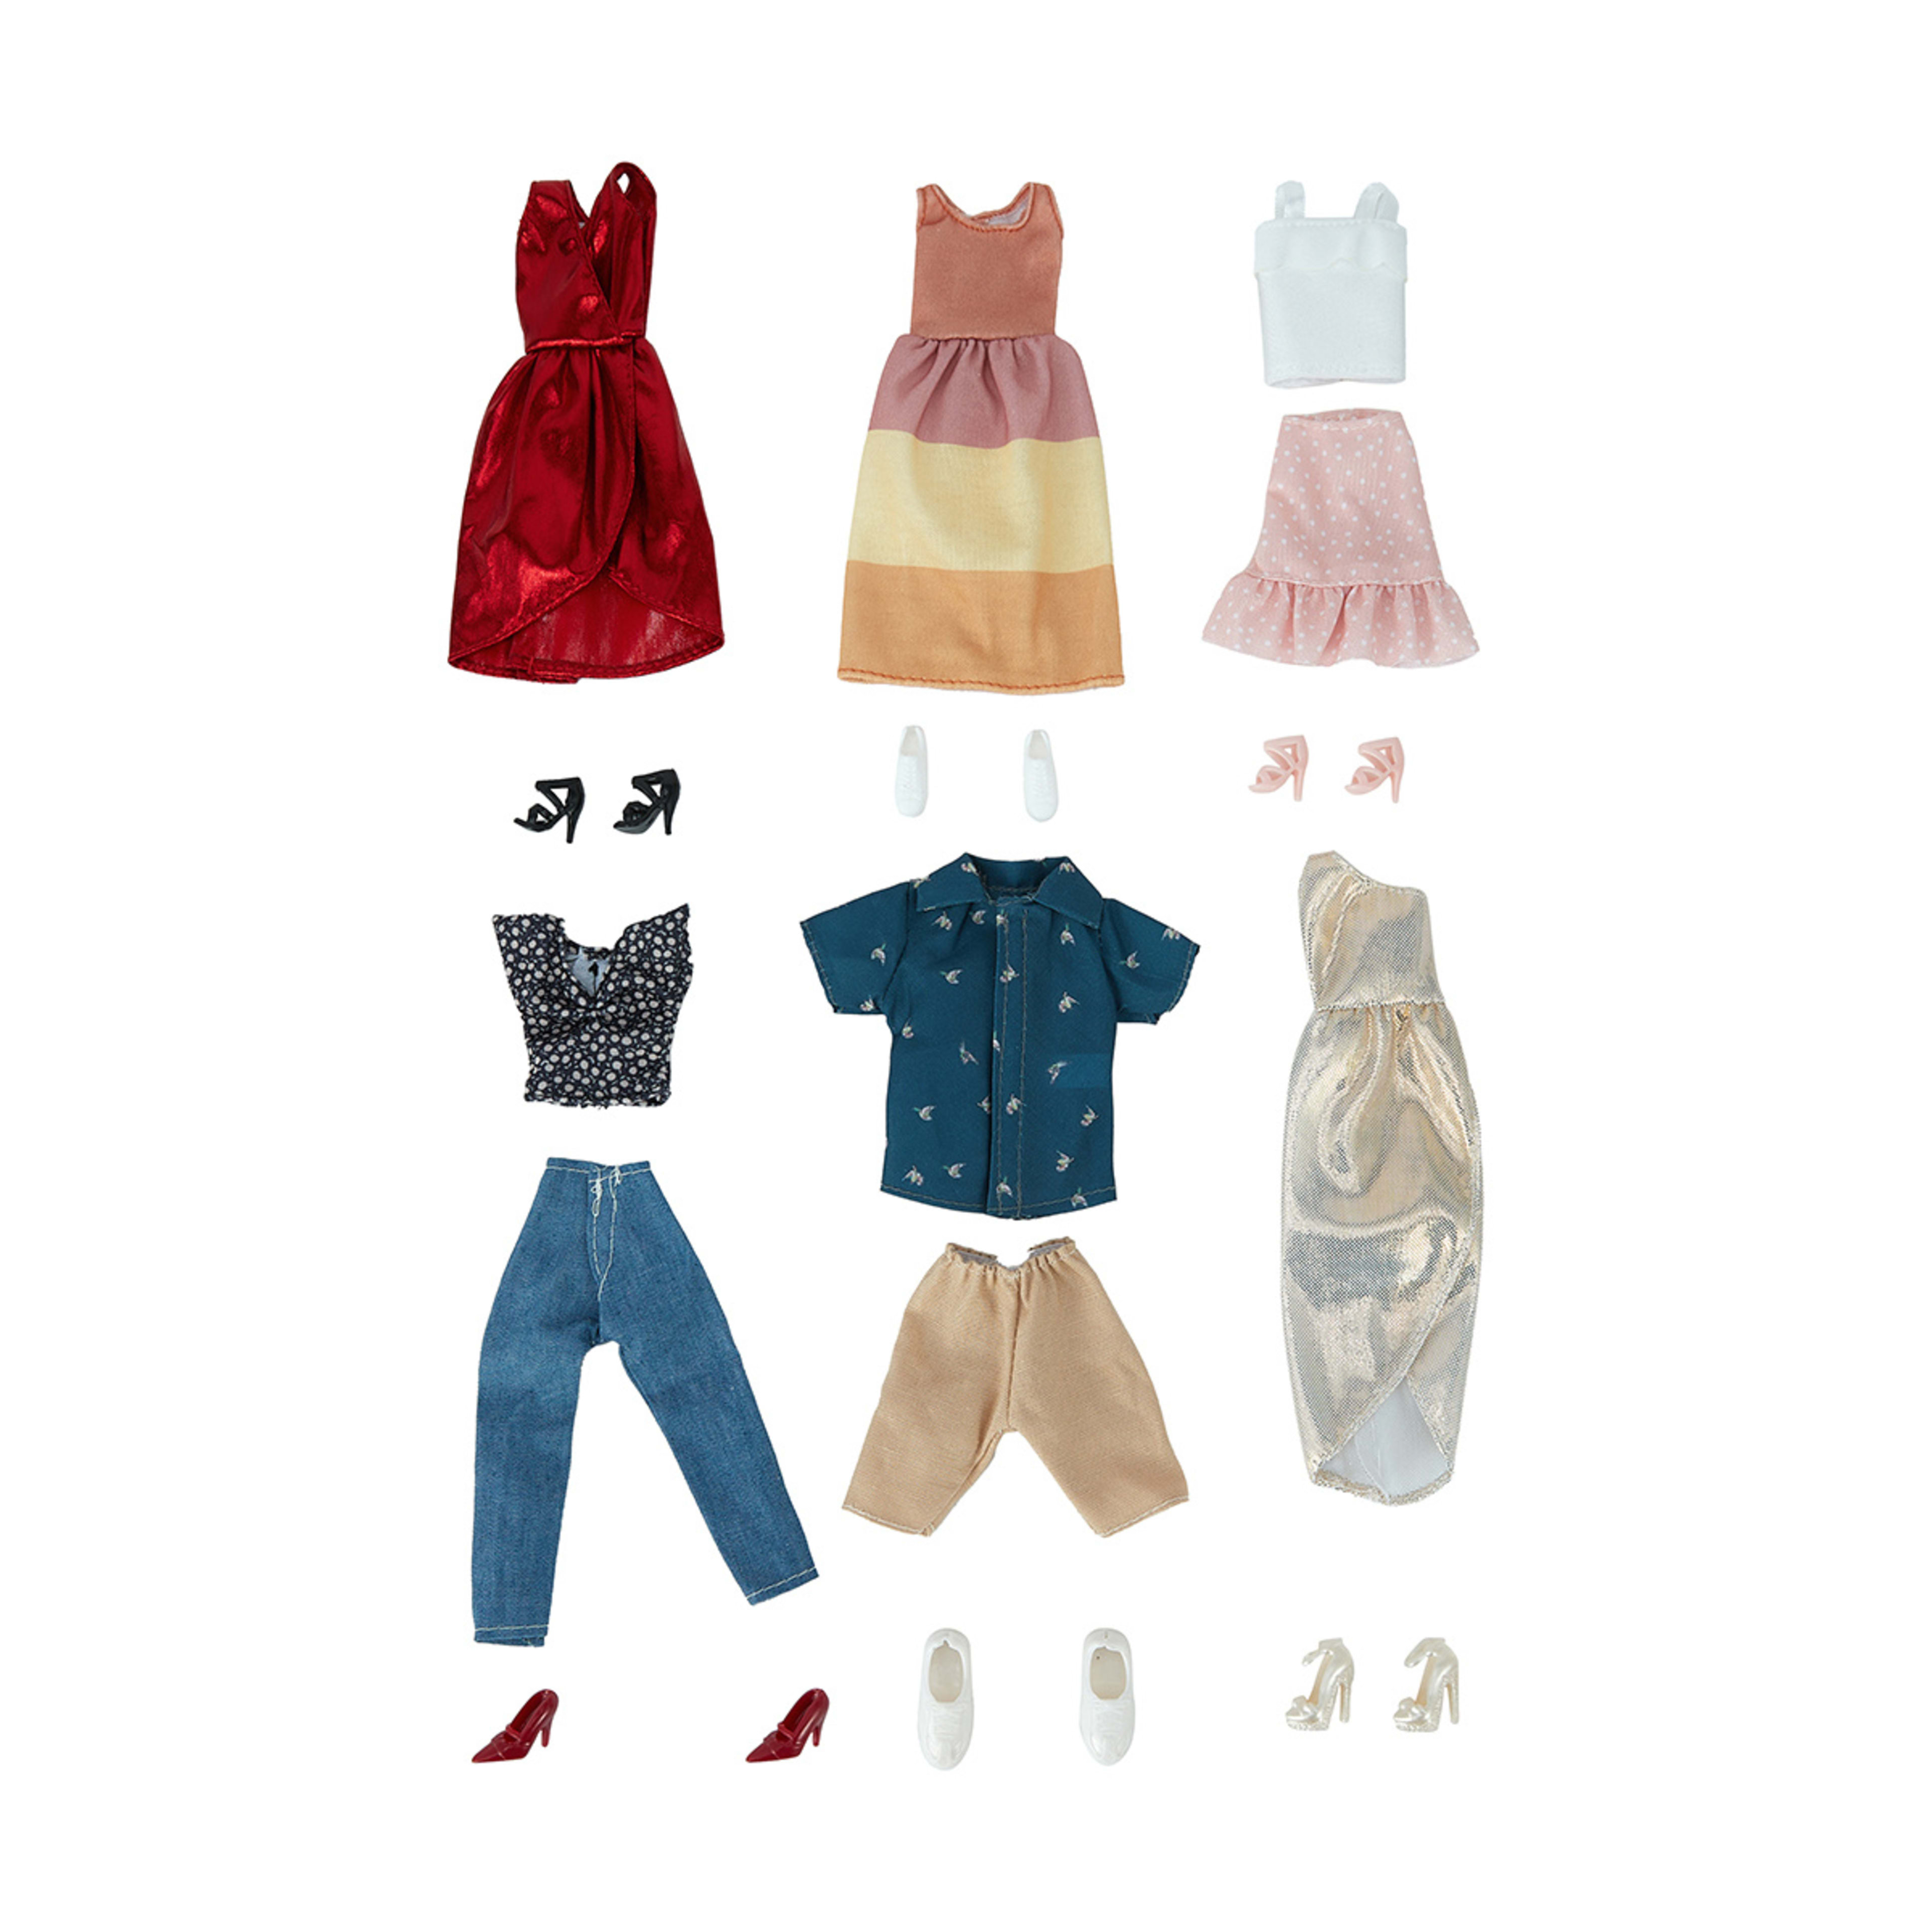 Doll Outfits - Assorted - Kmart